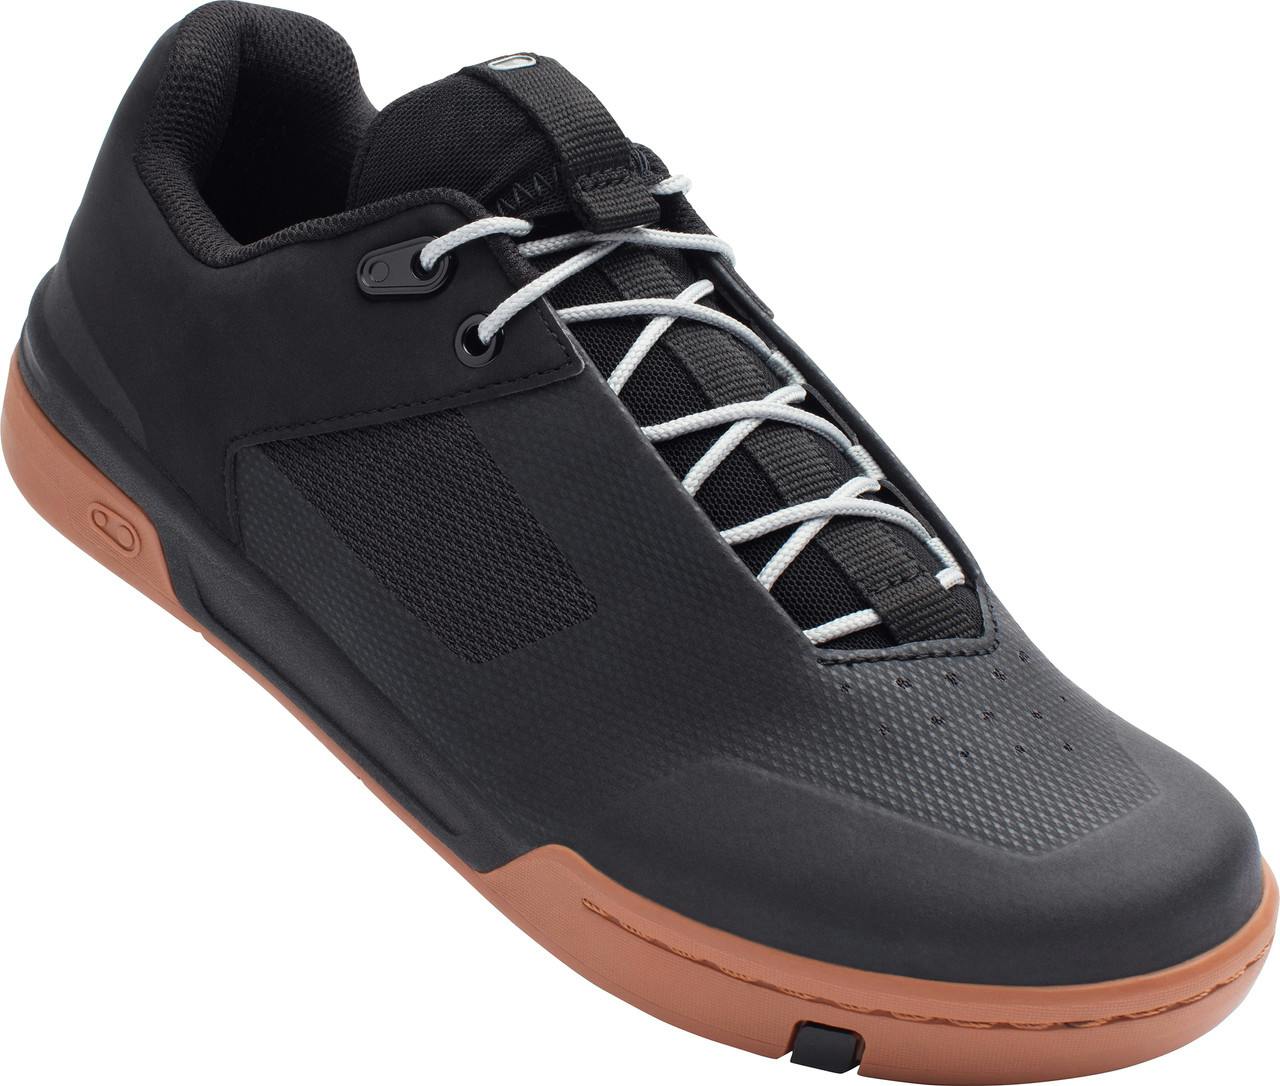 Stamp Lace Cycling Shoes Black/Silver/Gum